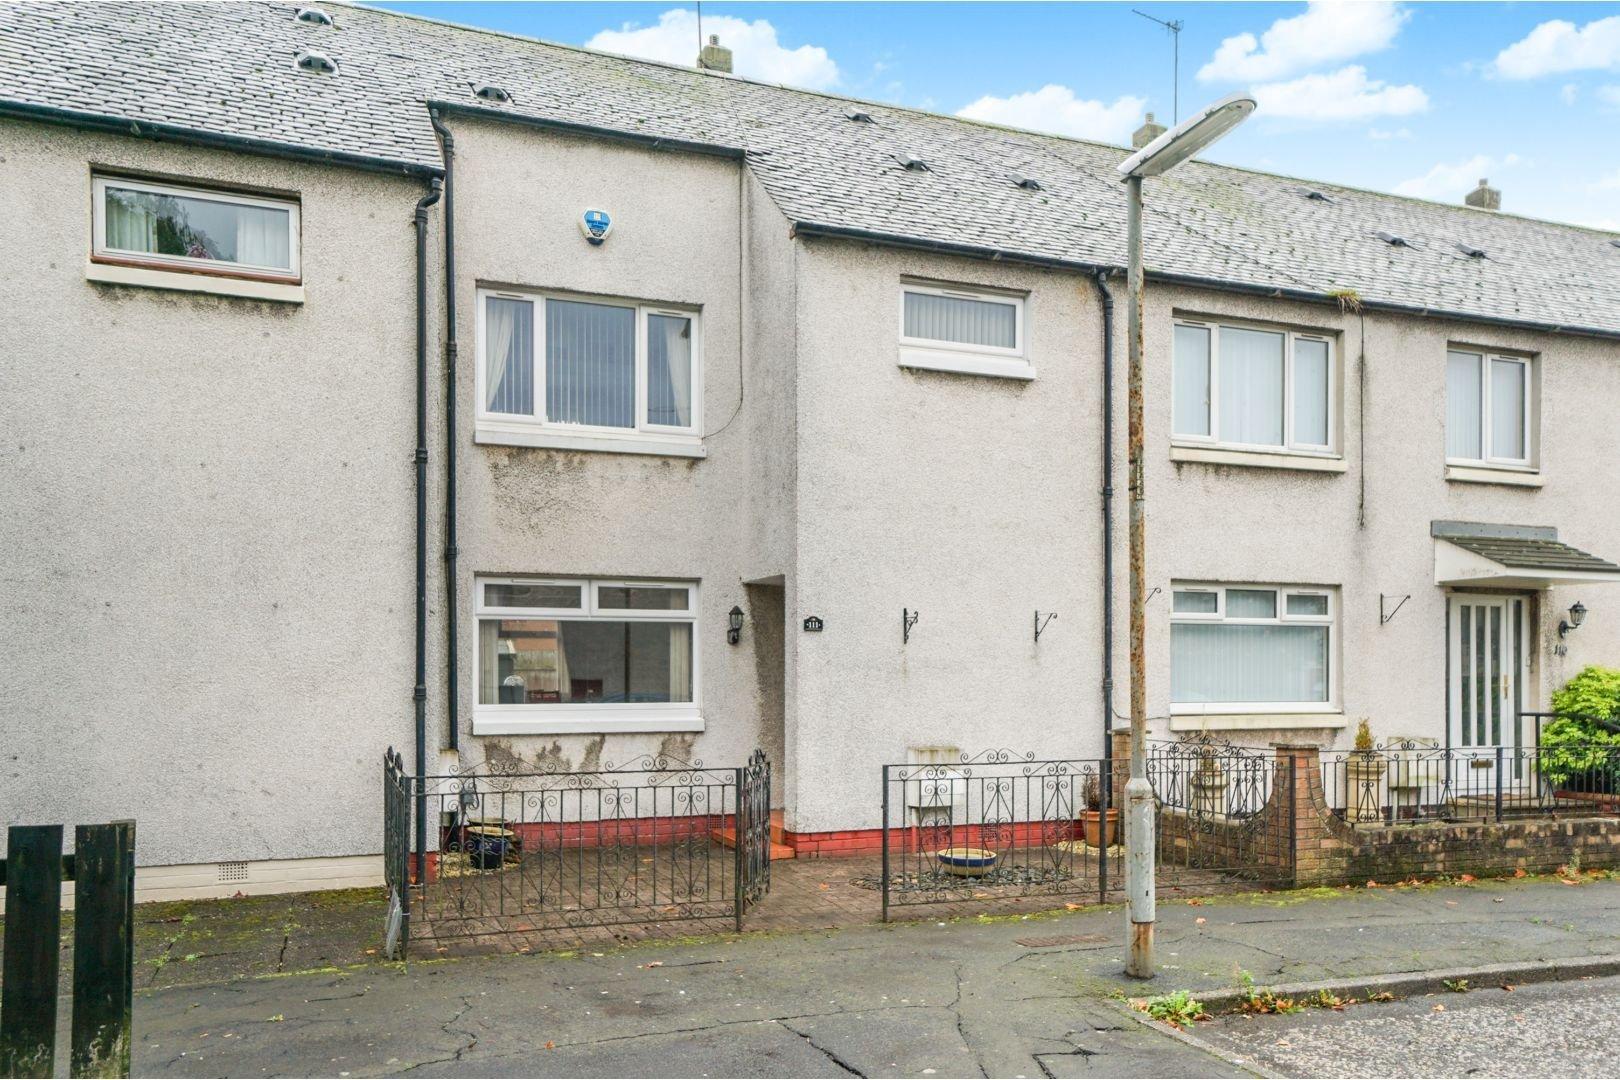 Offers over £90,000. More details at https://www.zoopla.co.uk/for-sale/details/53086530?search_identifier=6a856ba437d6a2980733b44c11265674